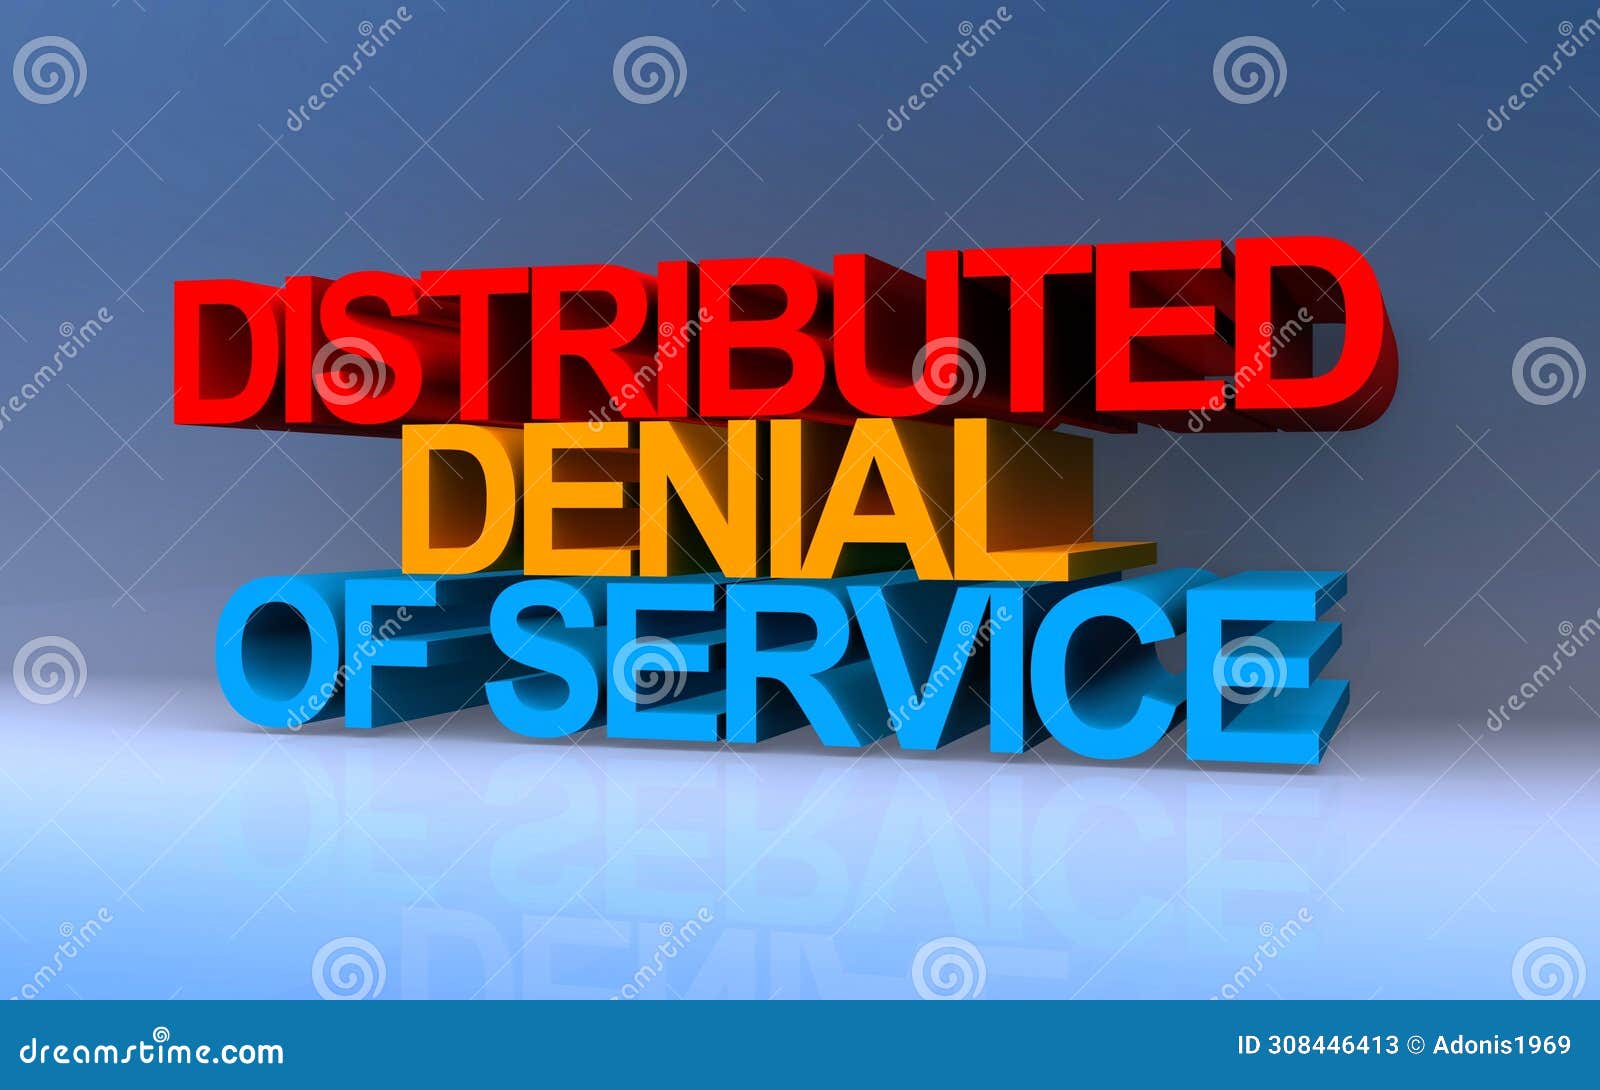 distributed denial of service on blue